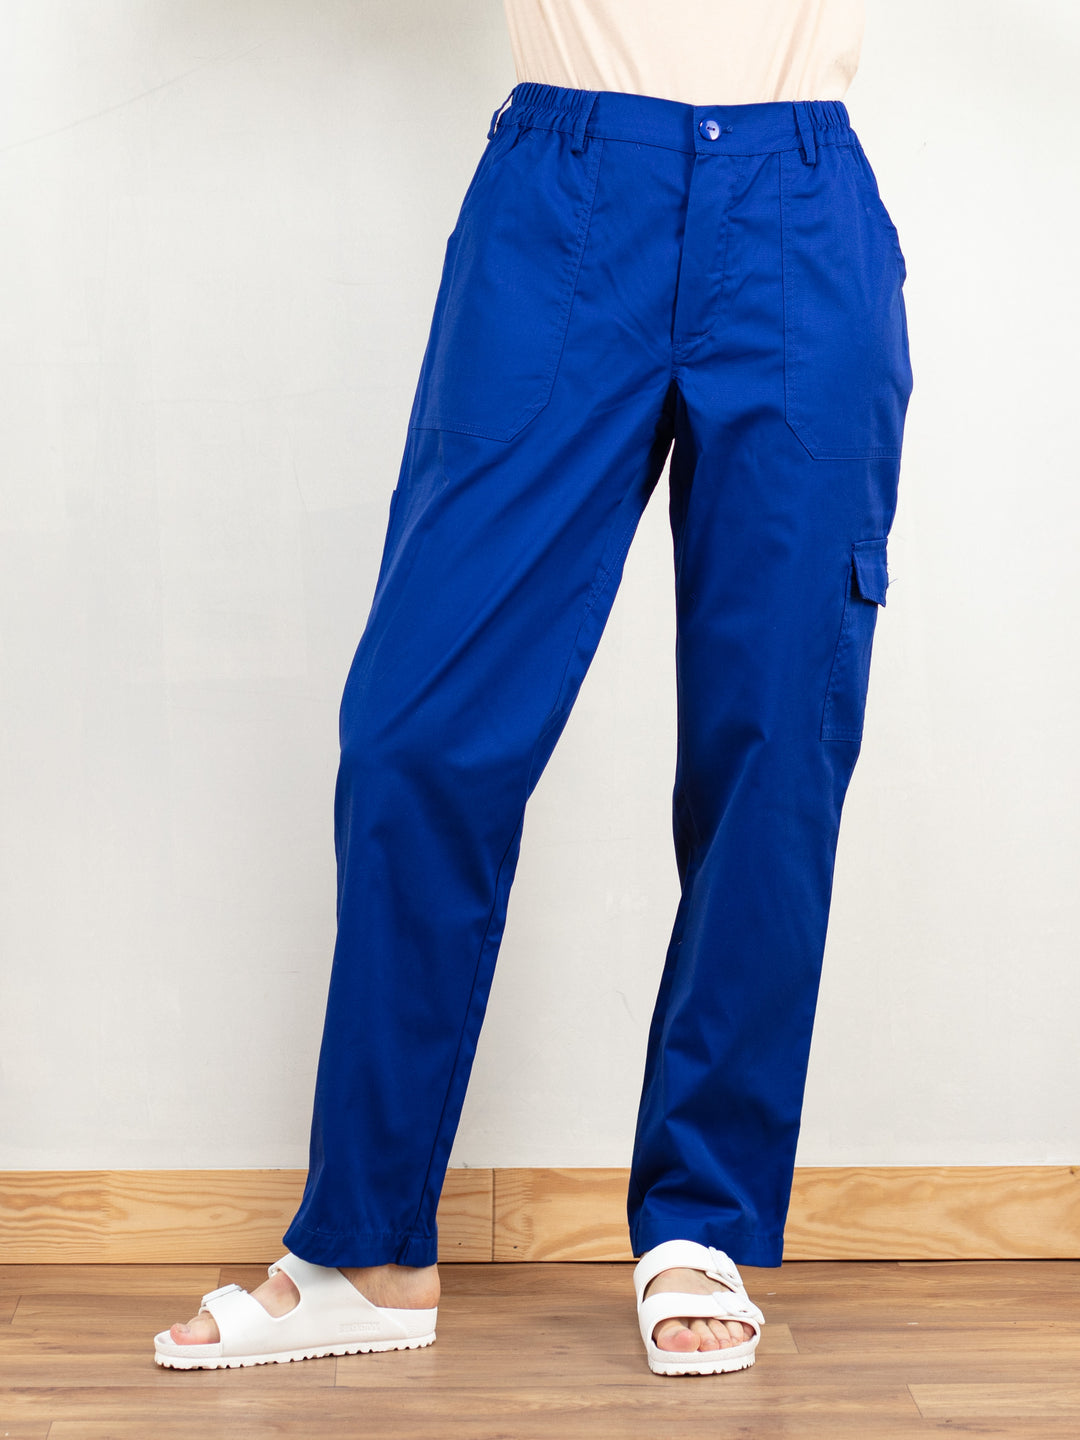  Women Work Pants vintage 90s workwear blue cargo chino pants straight painter pants high rise utility pants vintage clothing size small